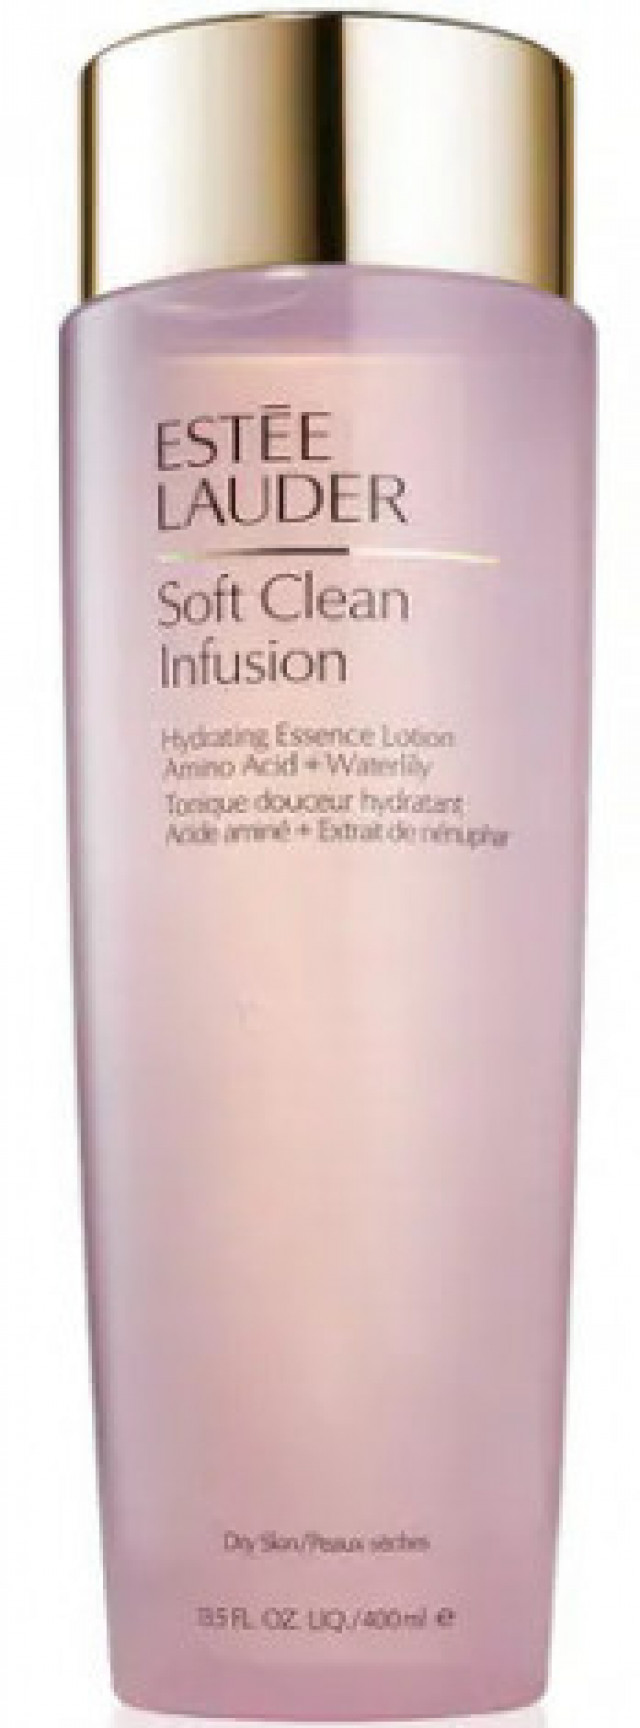 Soft clean infusion